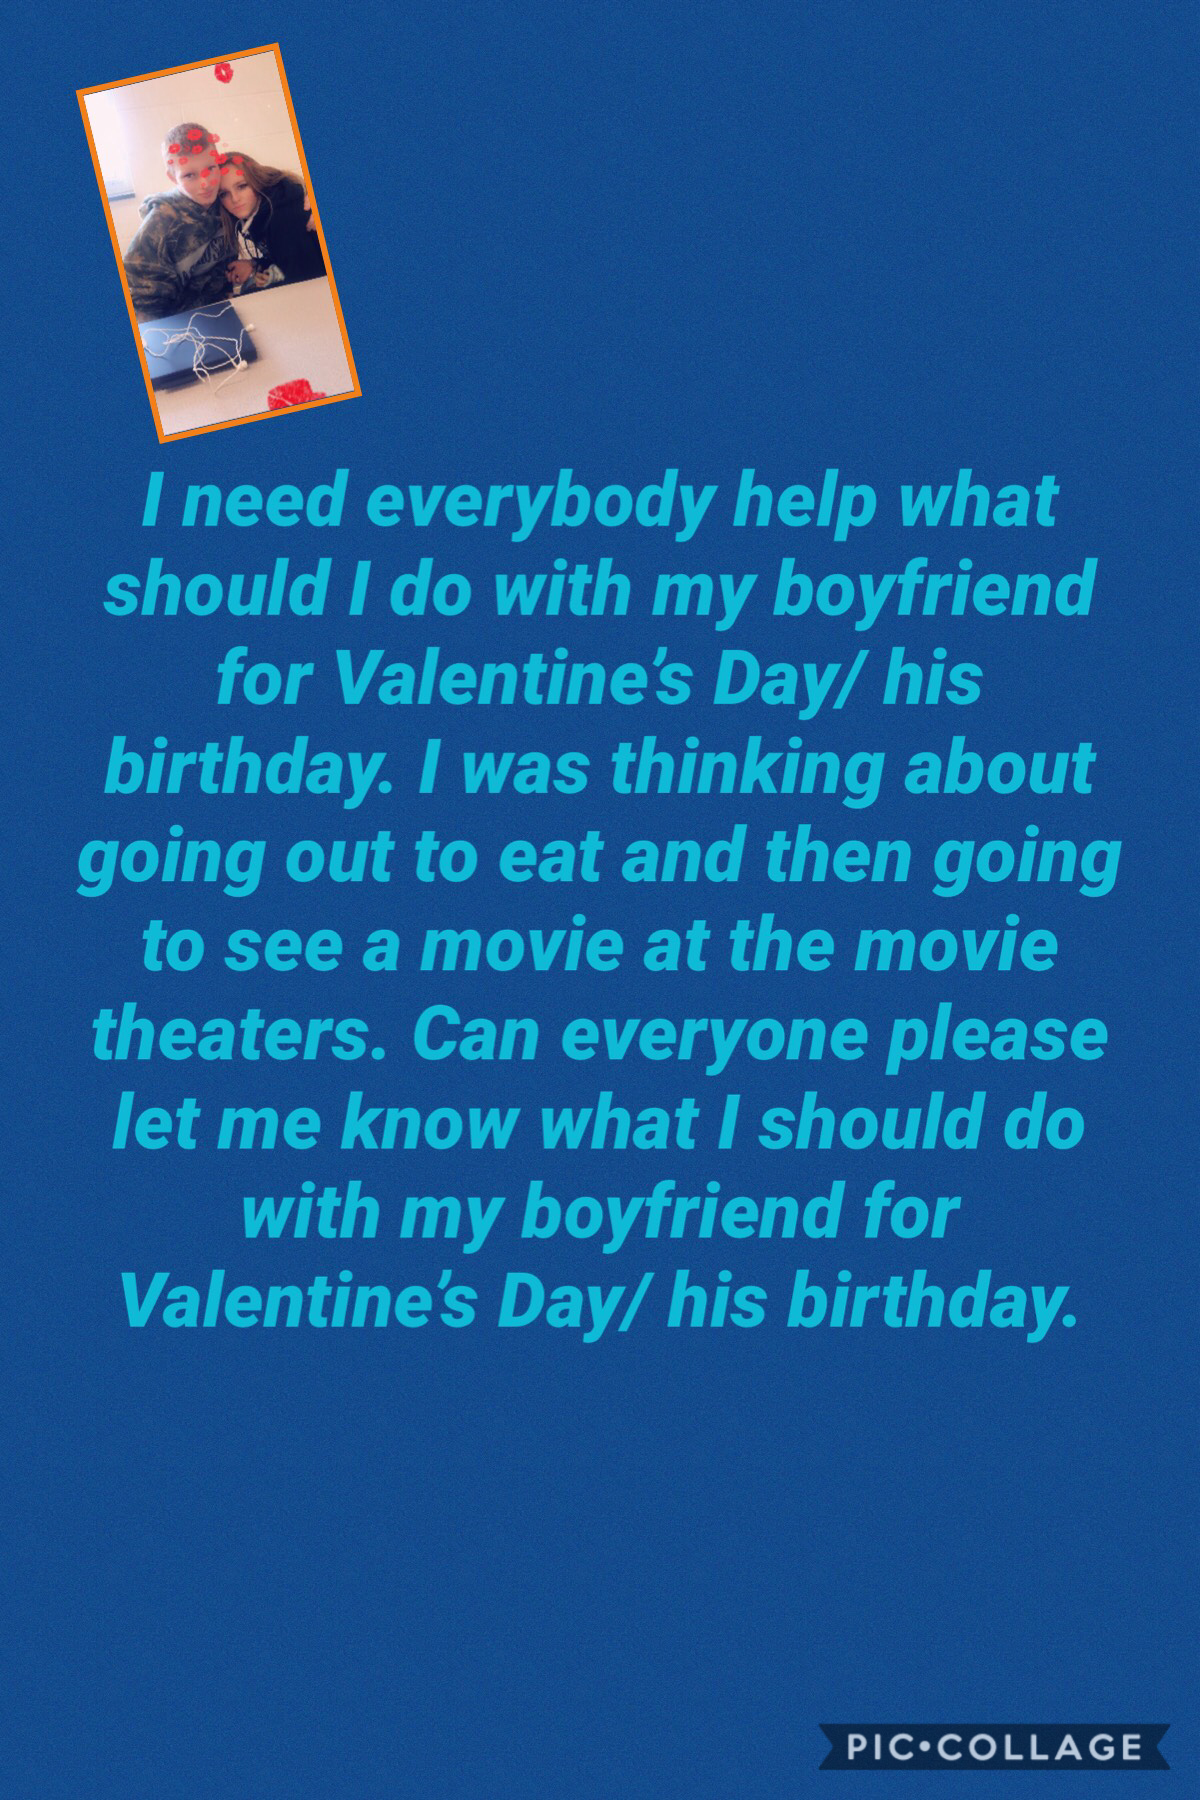 What should I do with my boyfriend for Valentine’s Day/ his birthday I need your guys help